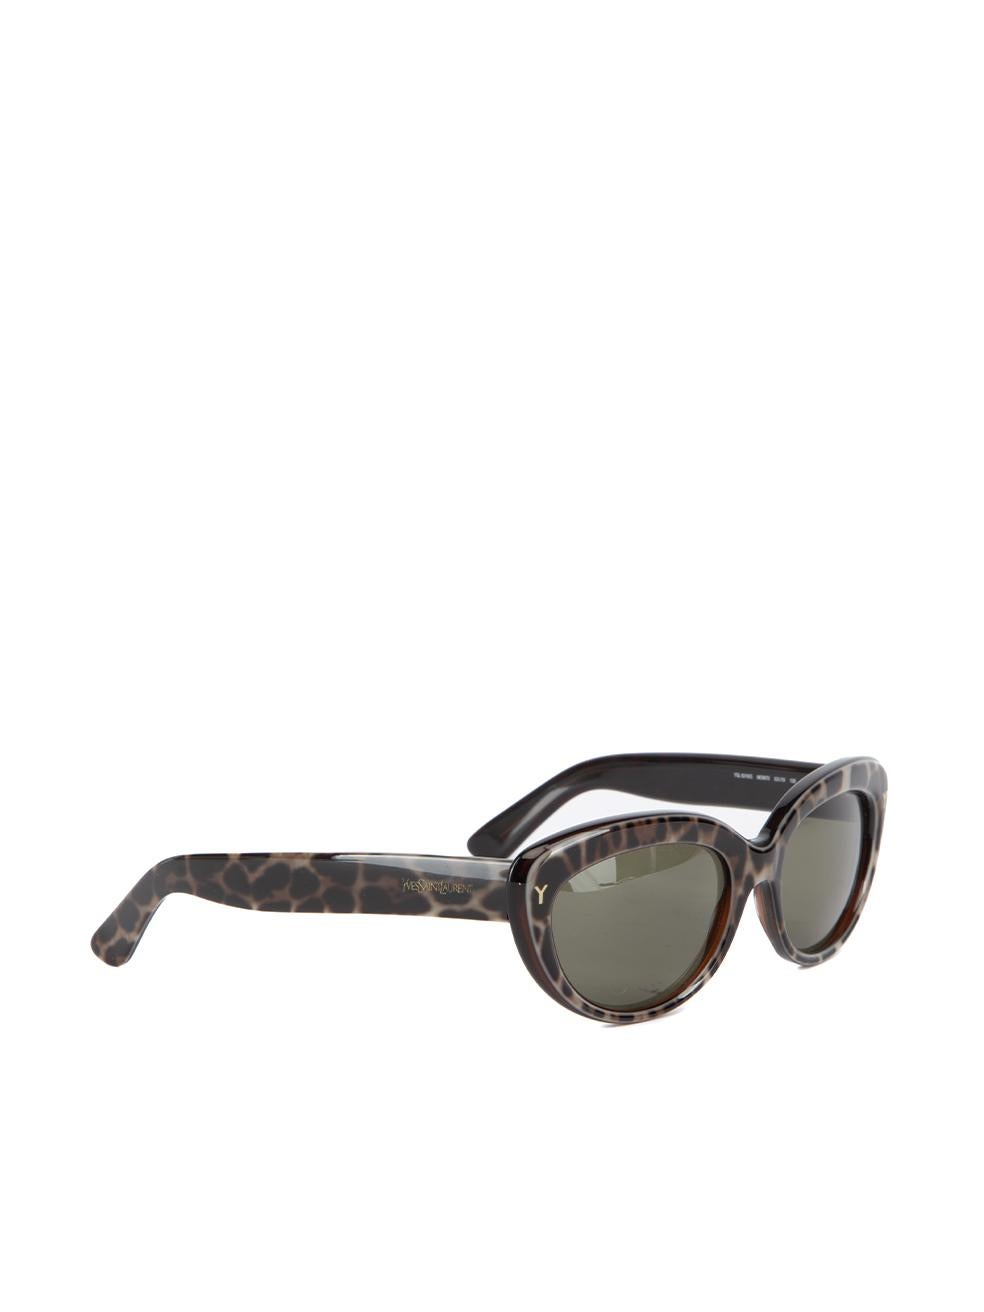 CONDITION is Very good. Hardly any visible wear to sunglasses is evident on this used Yves Saint Laurent designer resale item. This item comes with original case which shows signs of wear and lens cloth. Details Grey Acetate Leopard pattern Cat eye